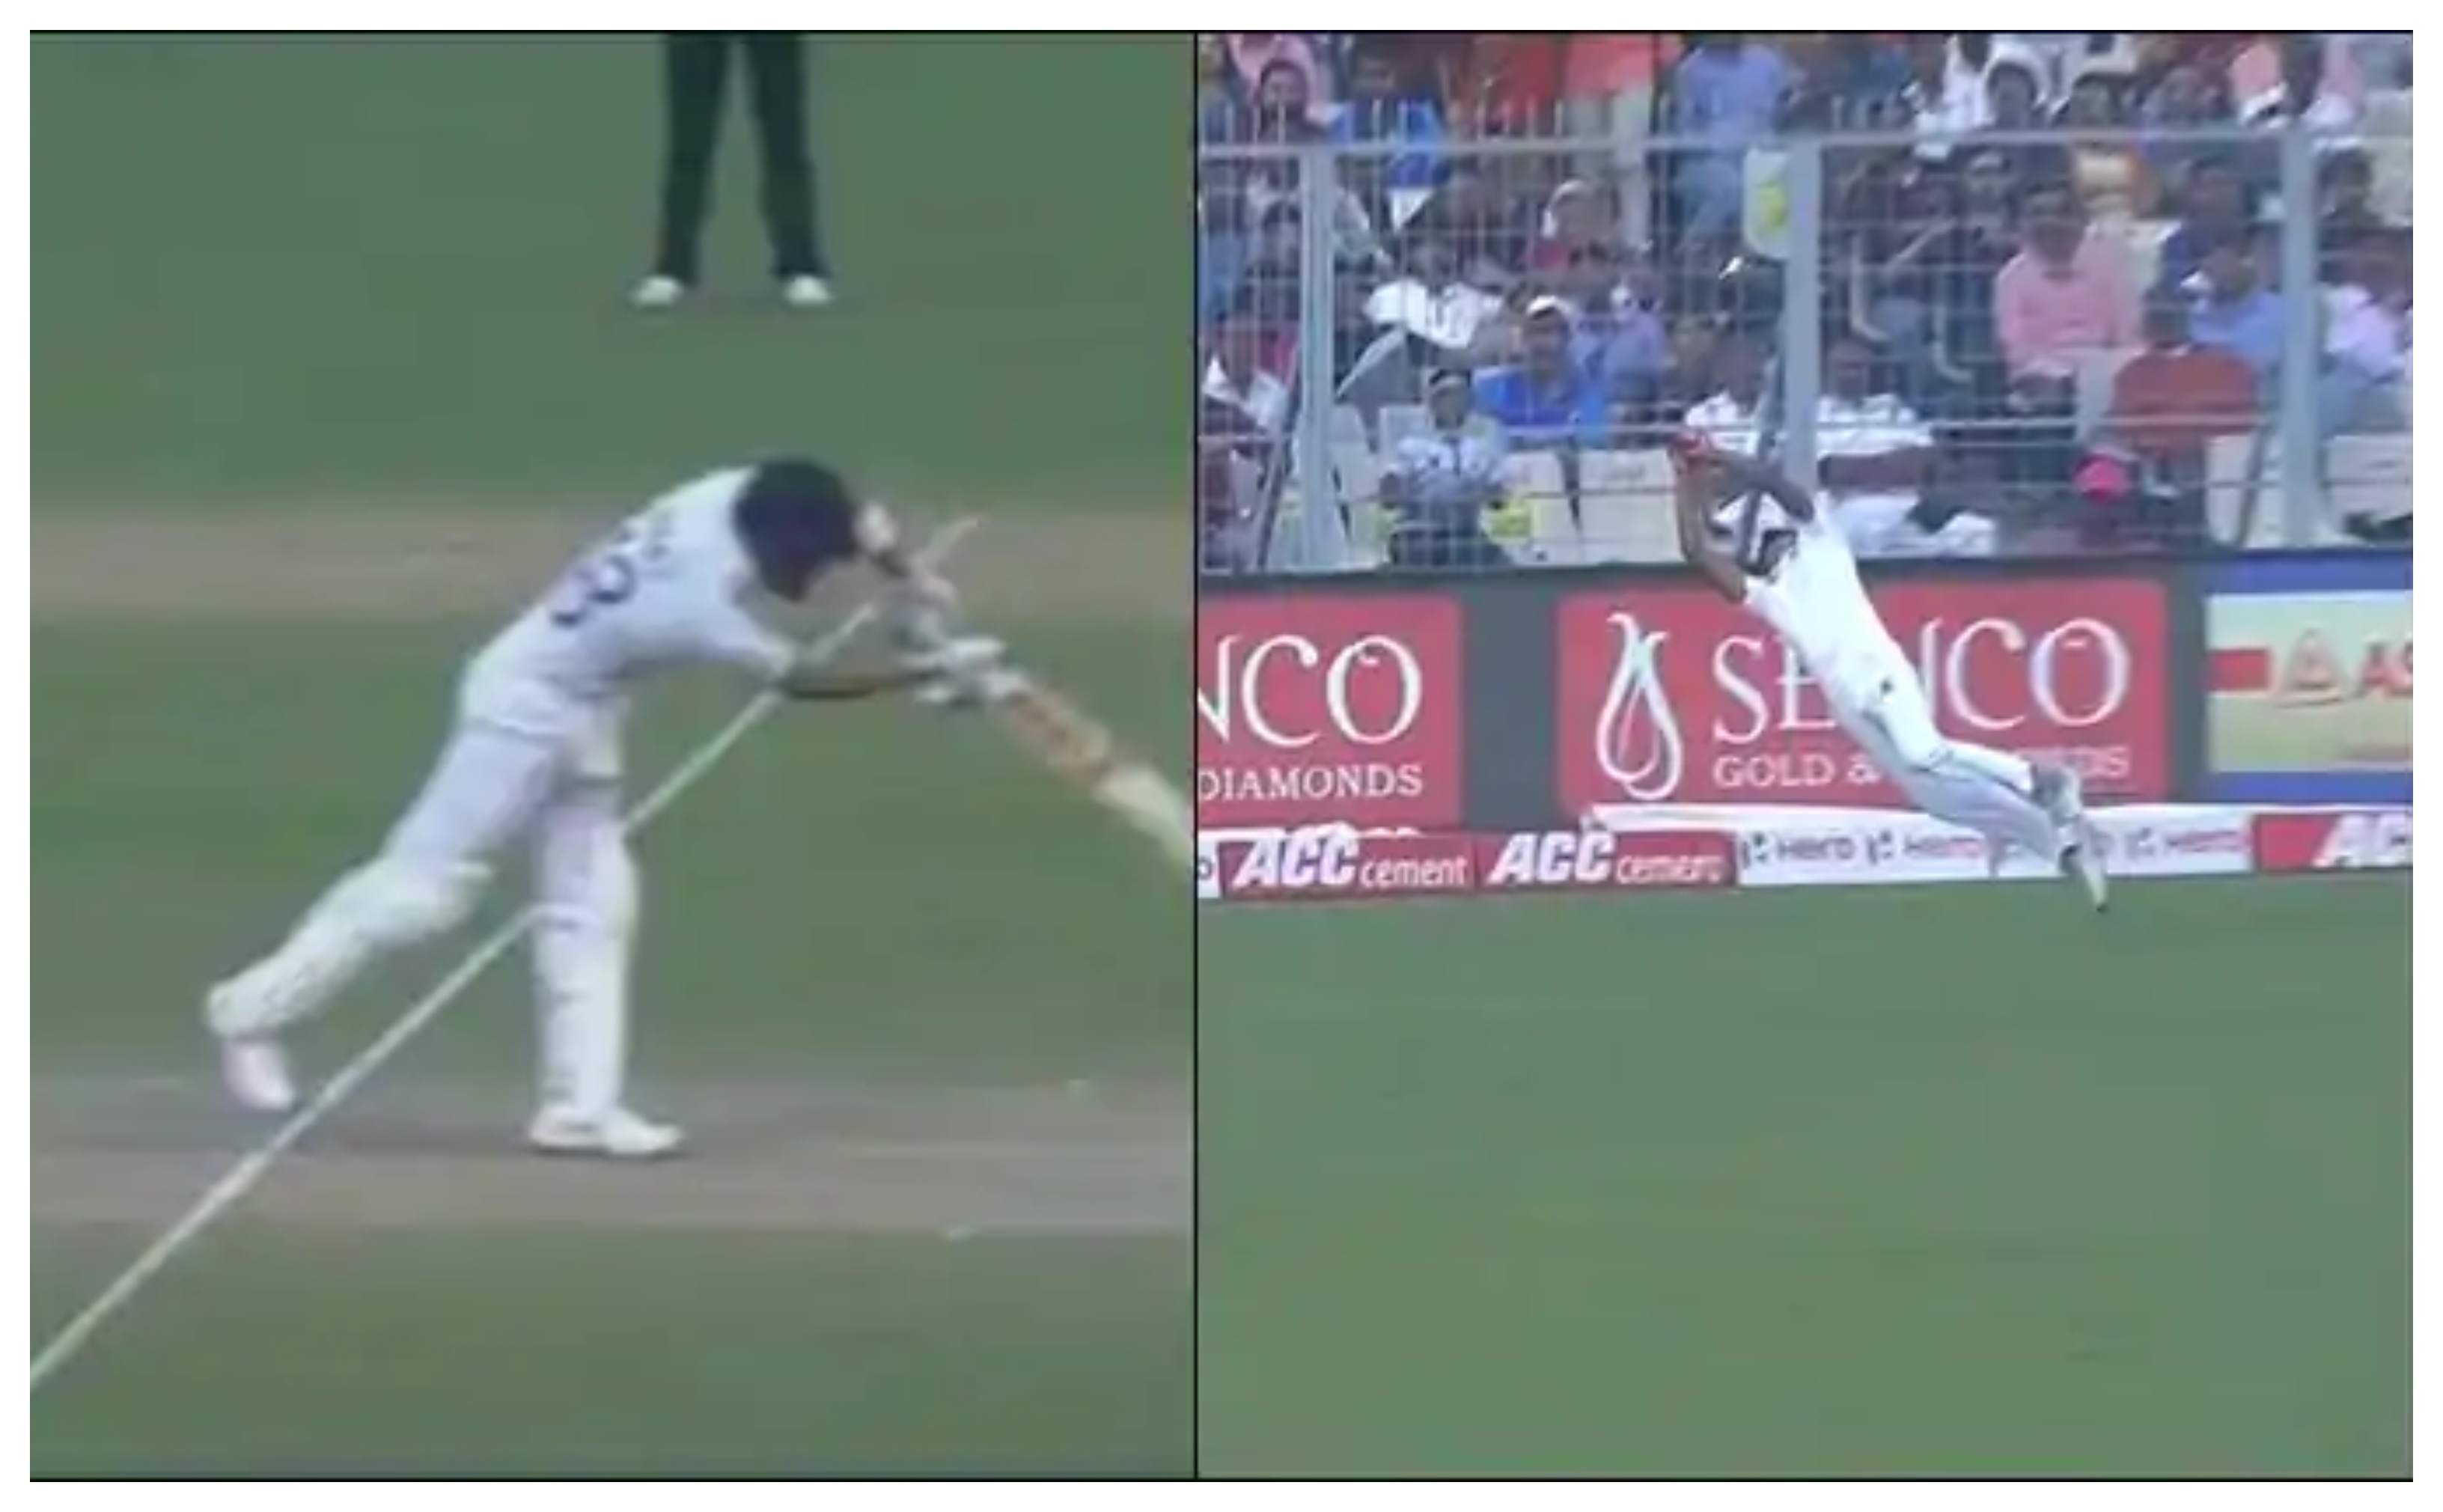 Taijul Islam's stunning catch to get rid of the Indian captain | Screengrab